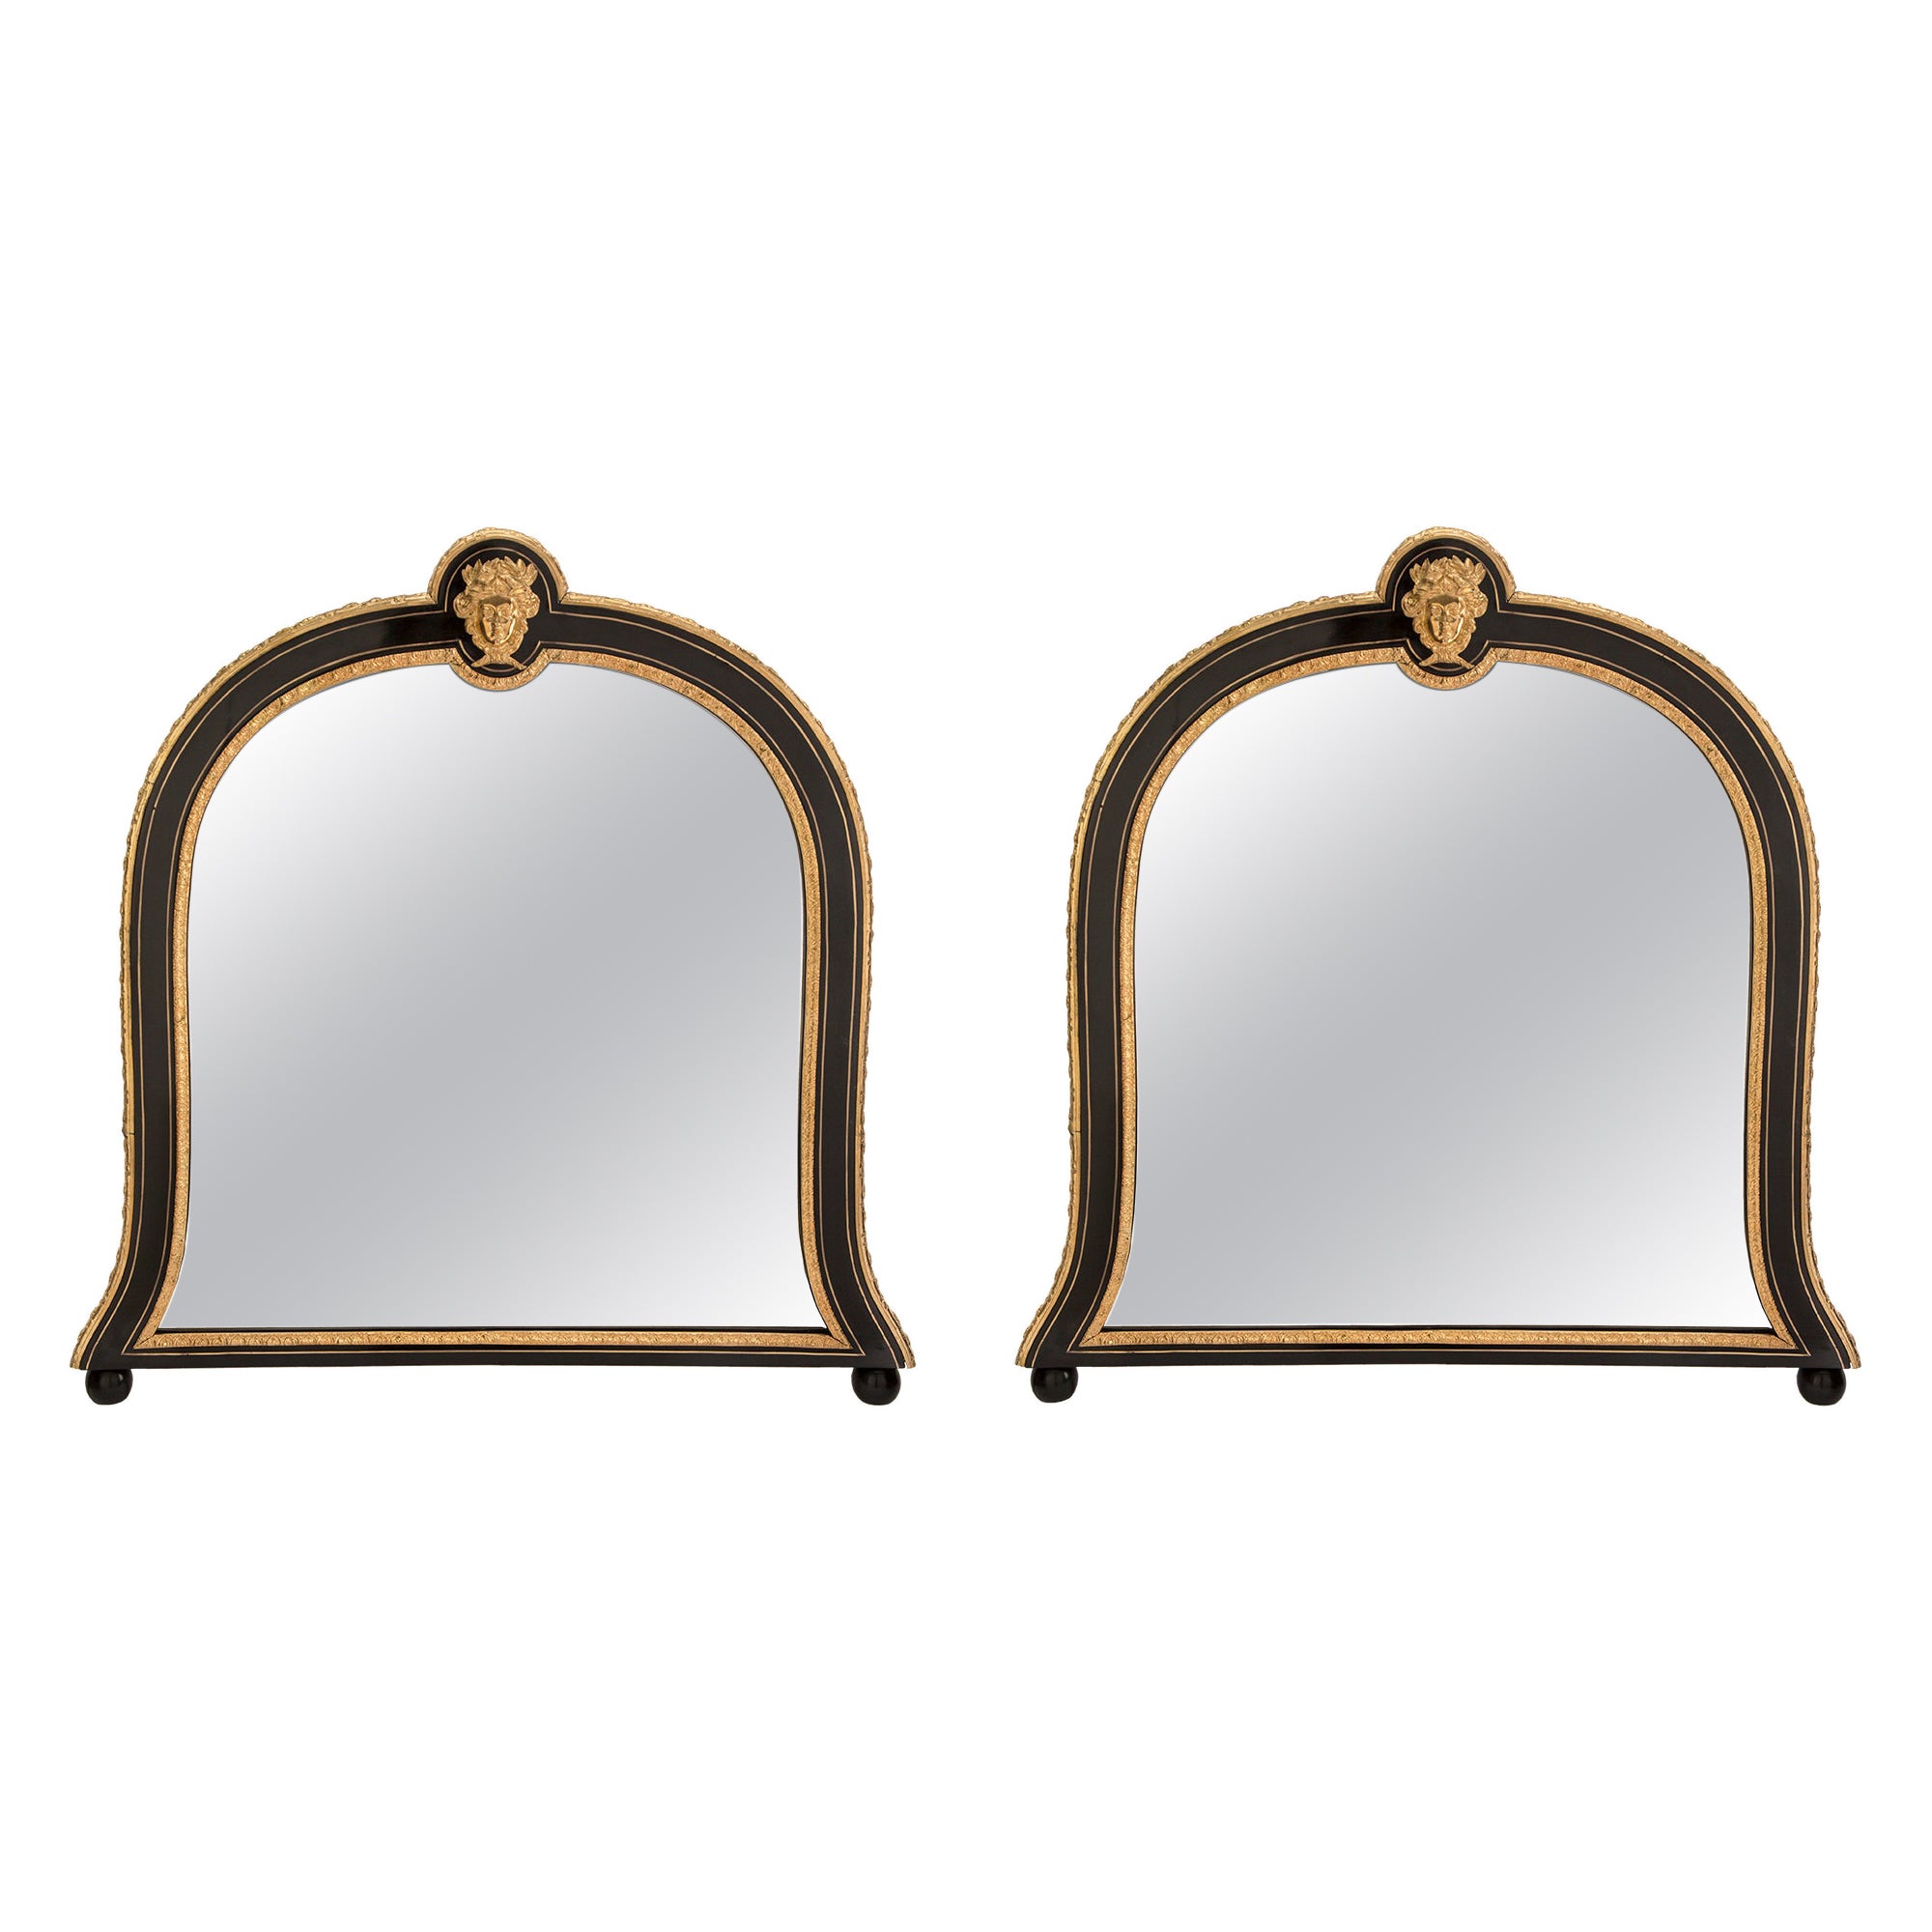 Pair of French 19th Century Napoleon III Period Louis XIV Style Mounted Mirrors For Sale